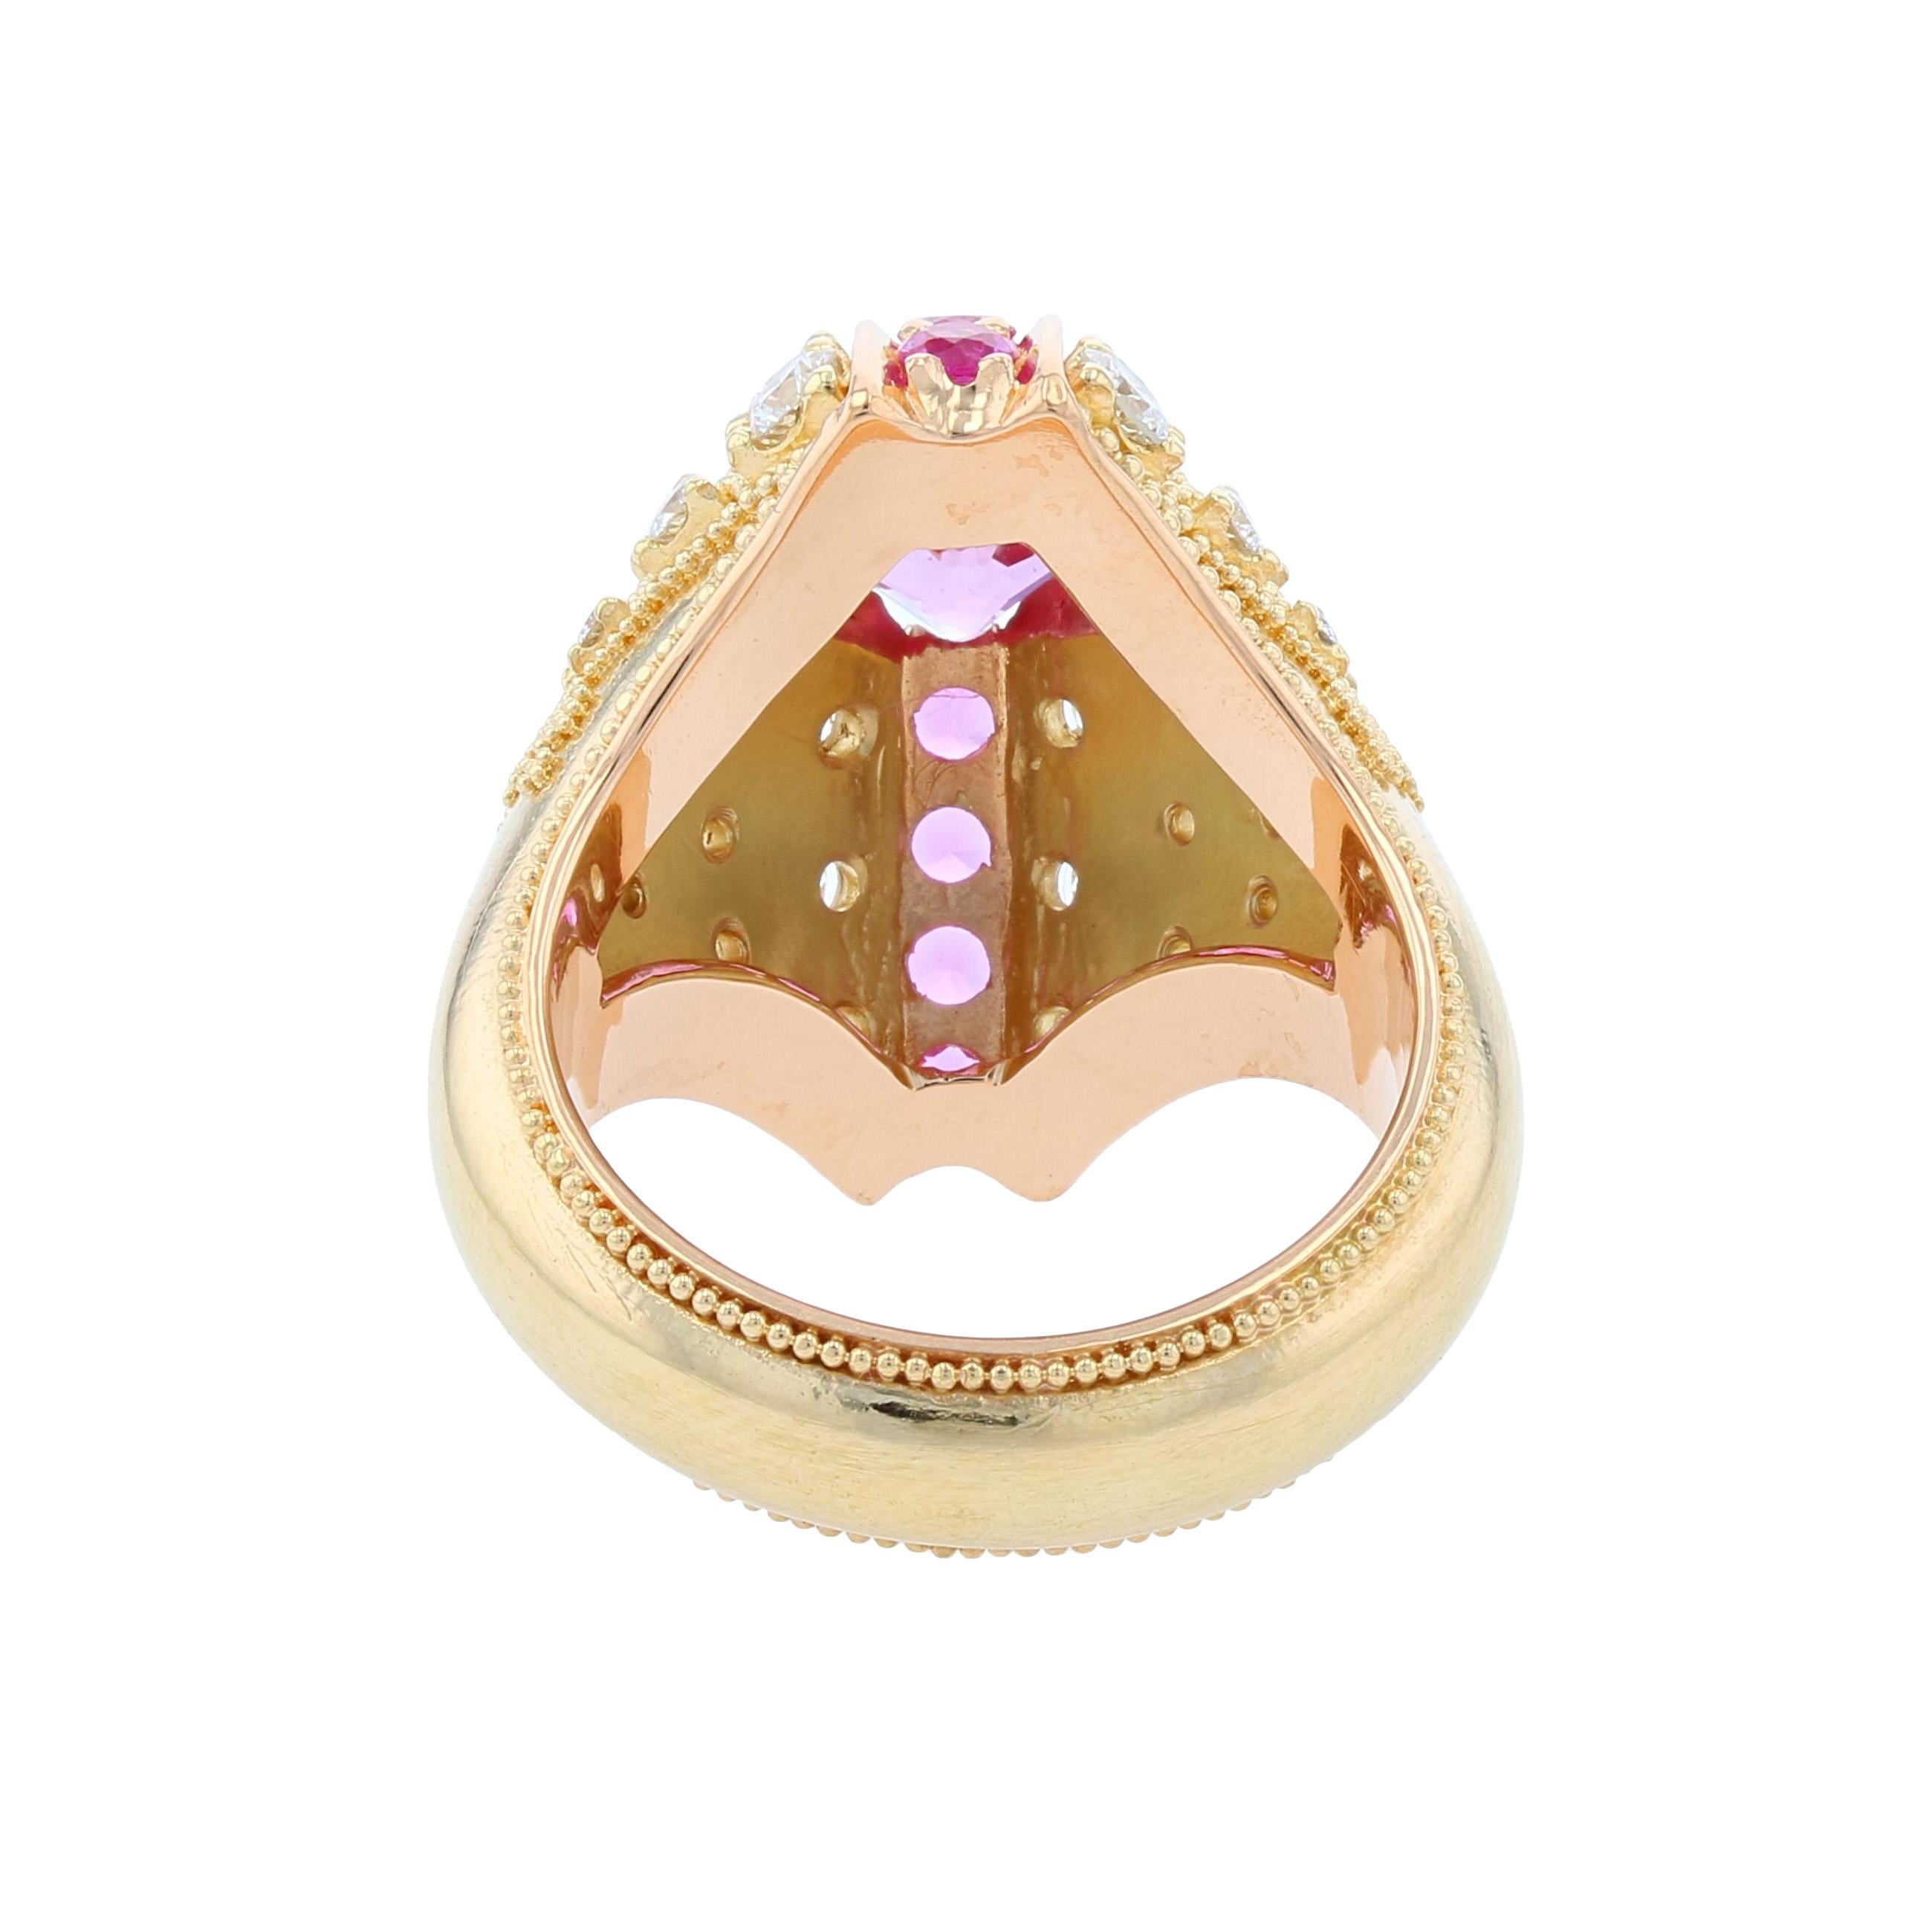 Kent Raible's Pink Sapphire and Diamond Bombe Fan Ring in 18K, Fine Granulation For Sale 1